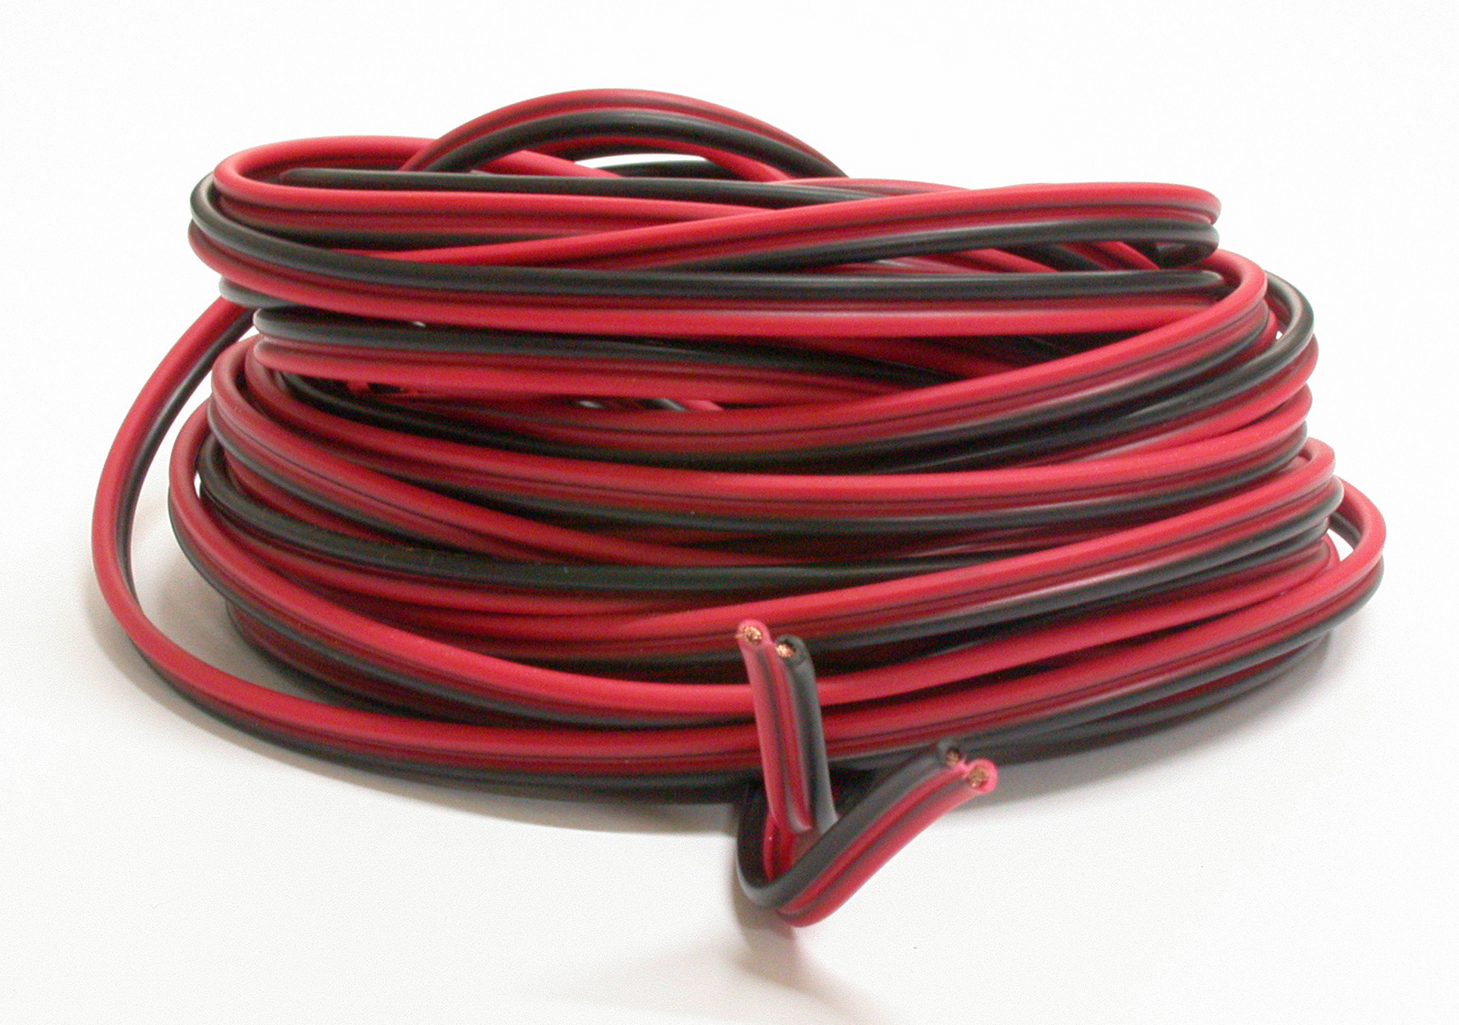 DS-0023 Wire for track power:  10m. one piece Black-red wire.